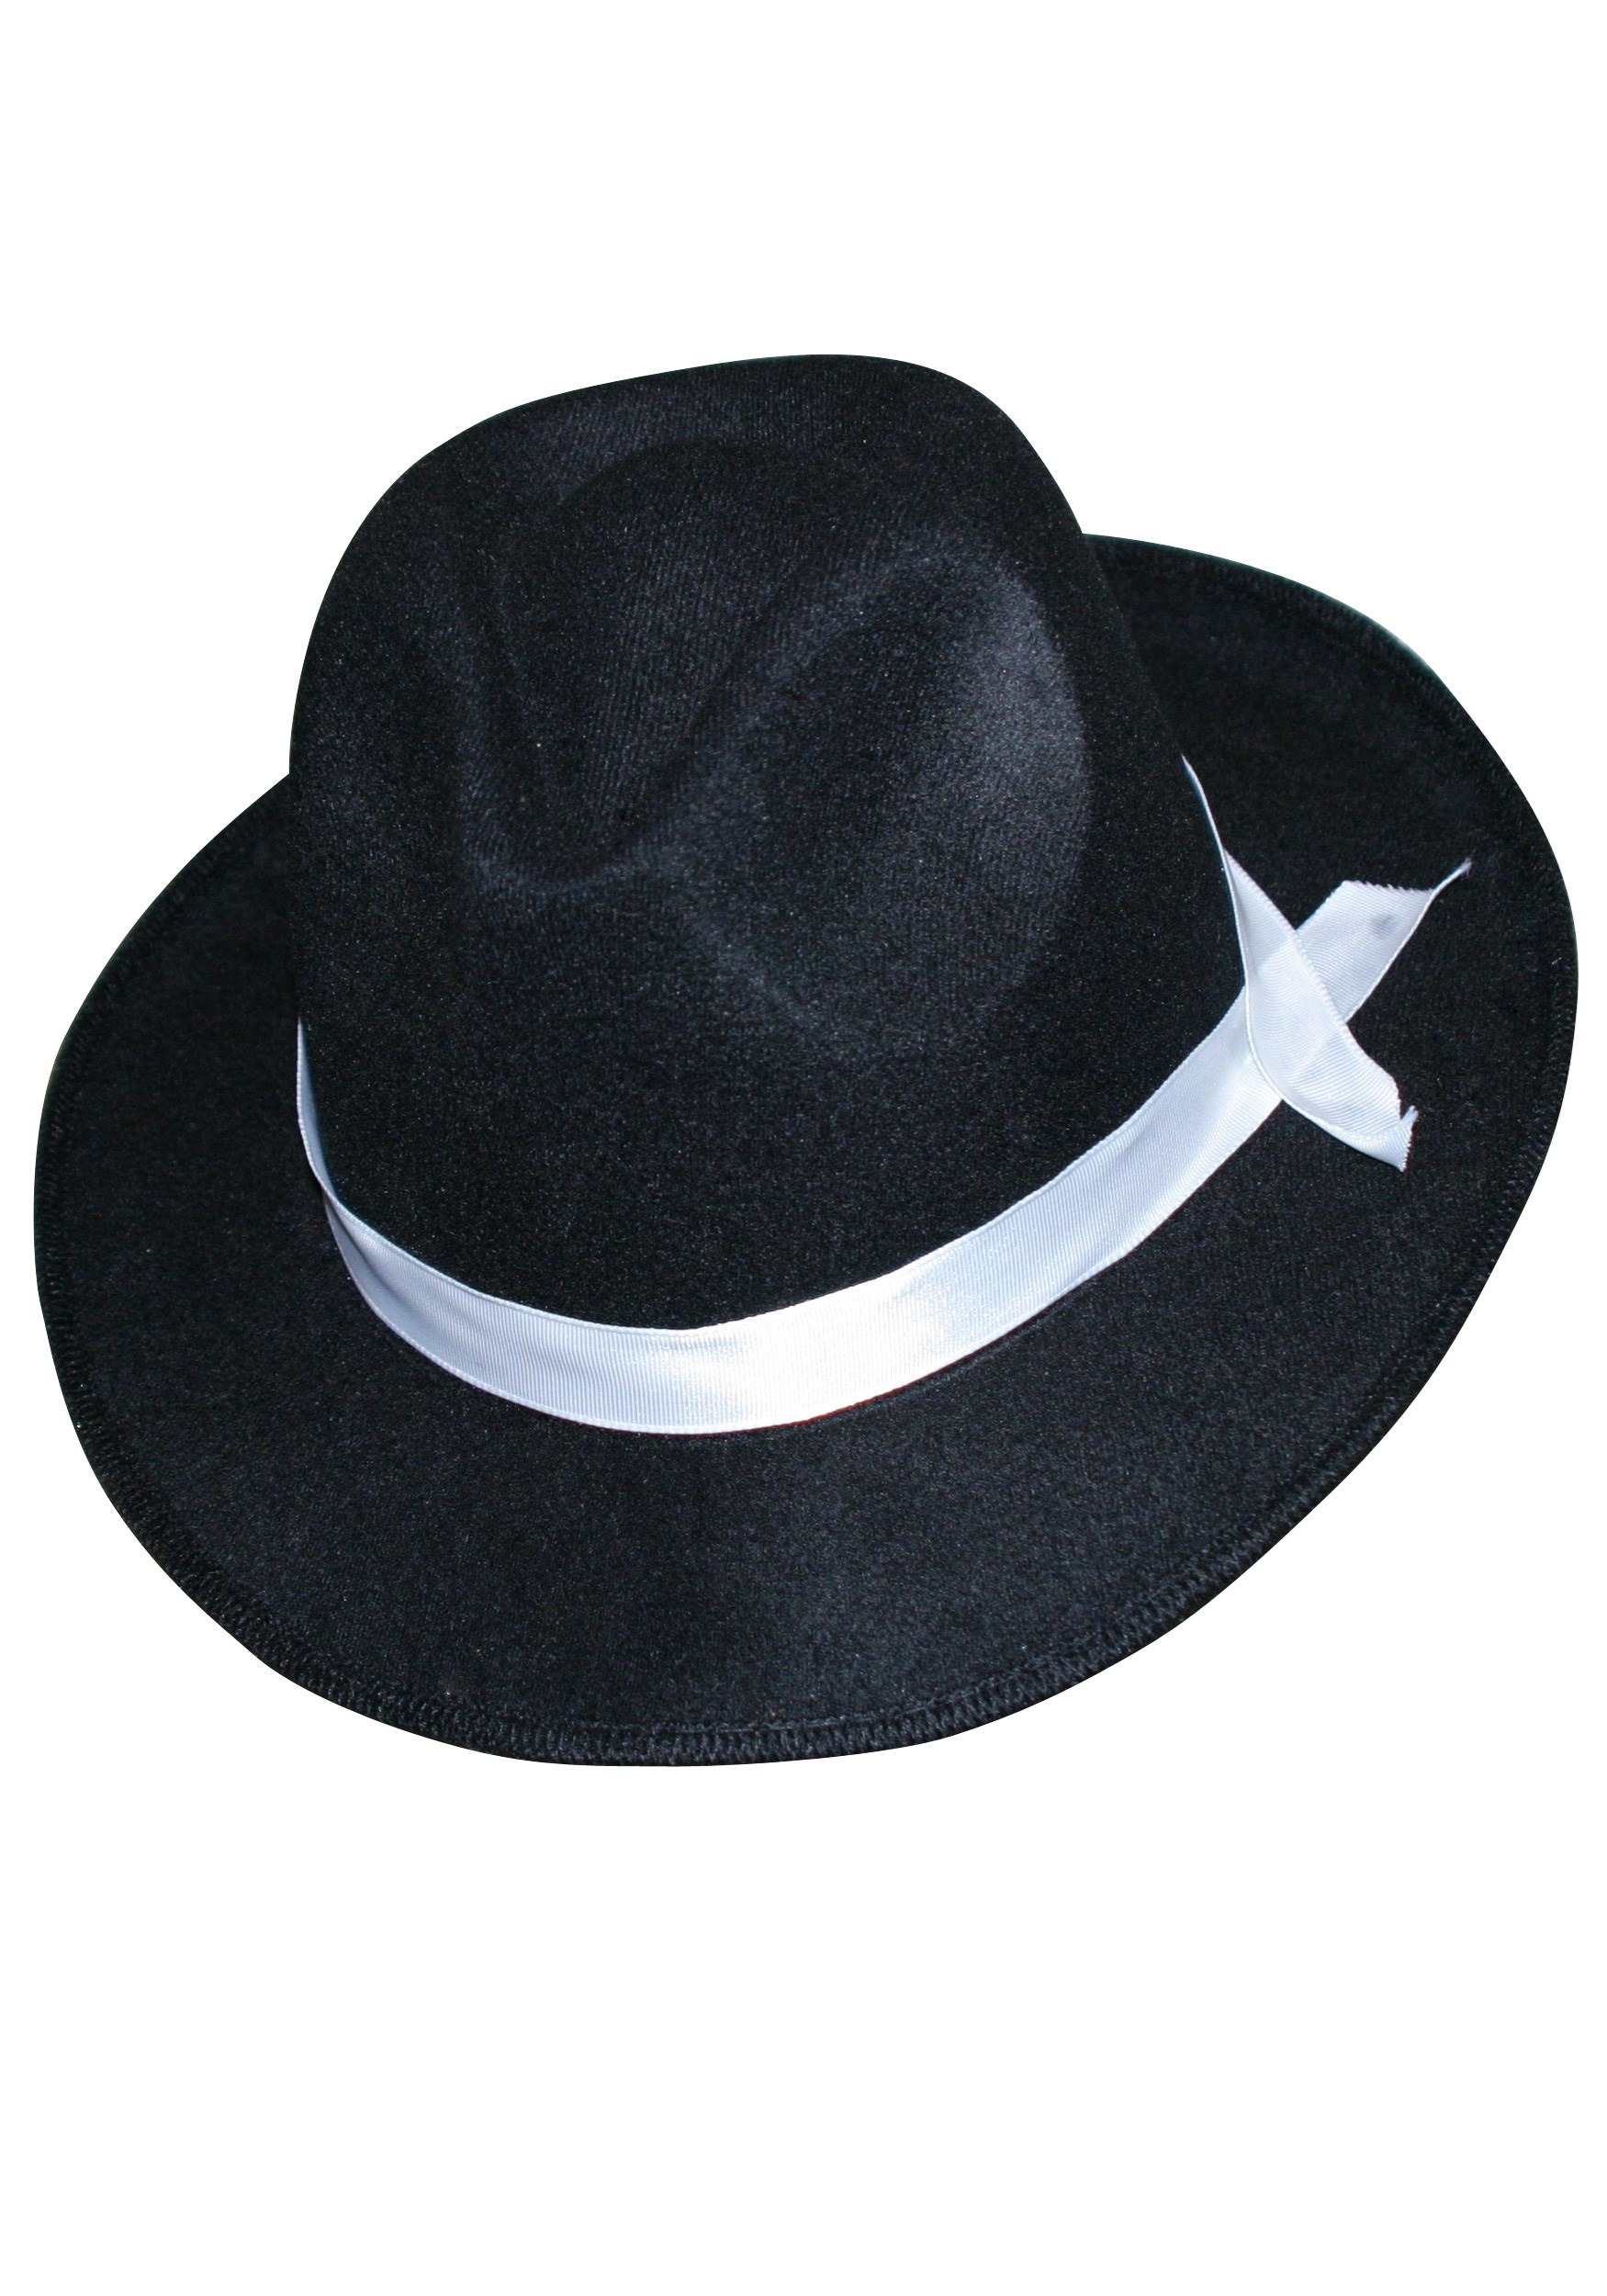 Zoot Suit Mobster Costume Hat for Adults